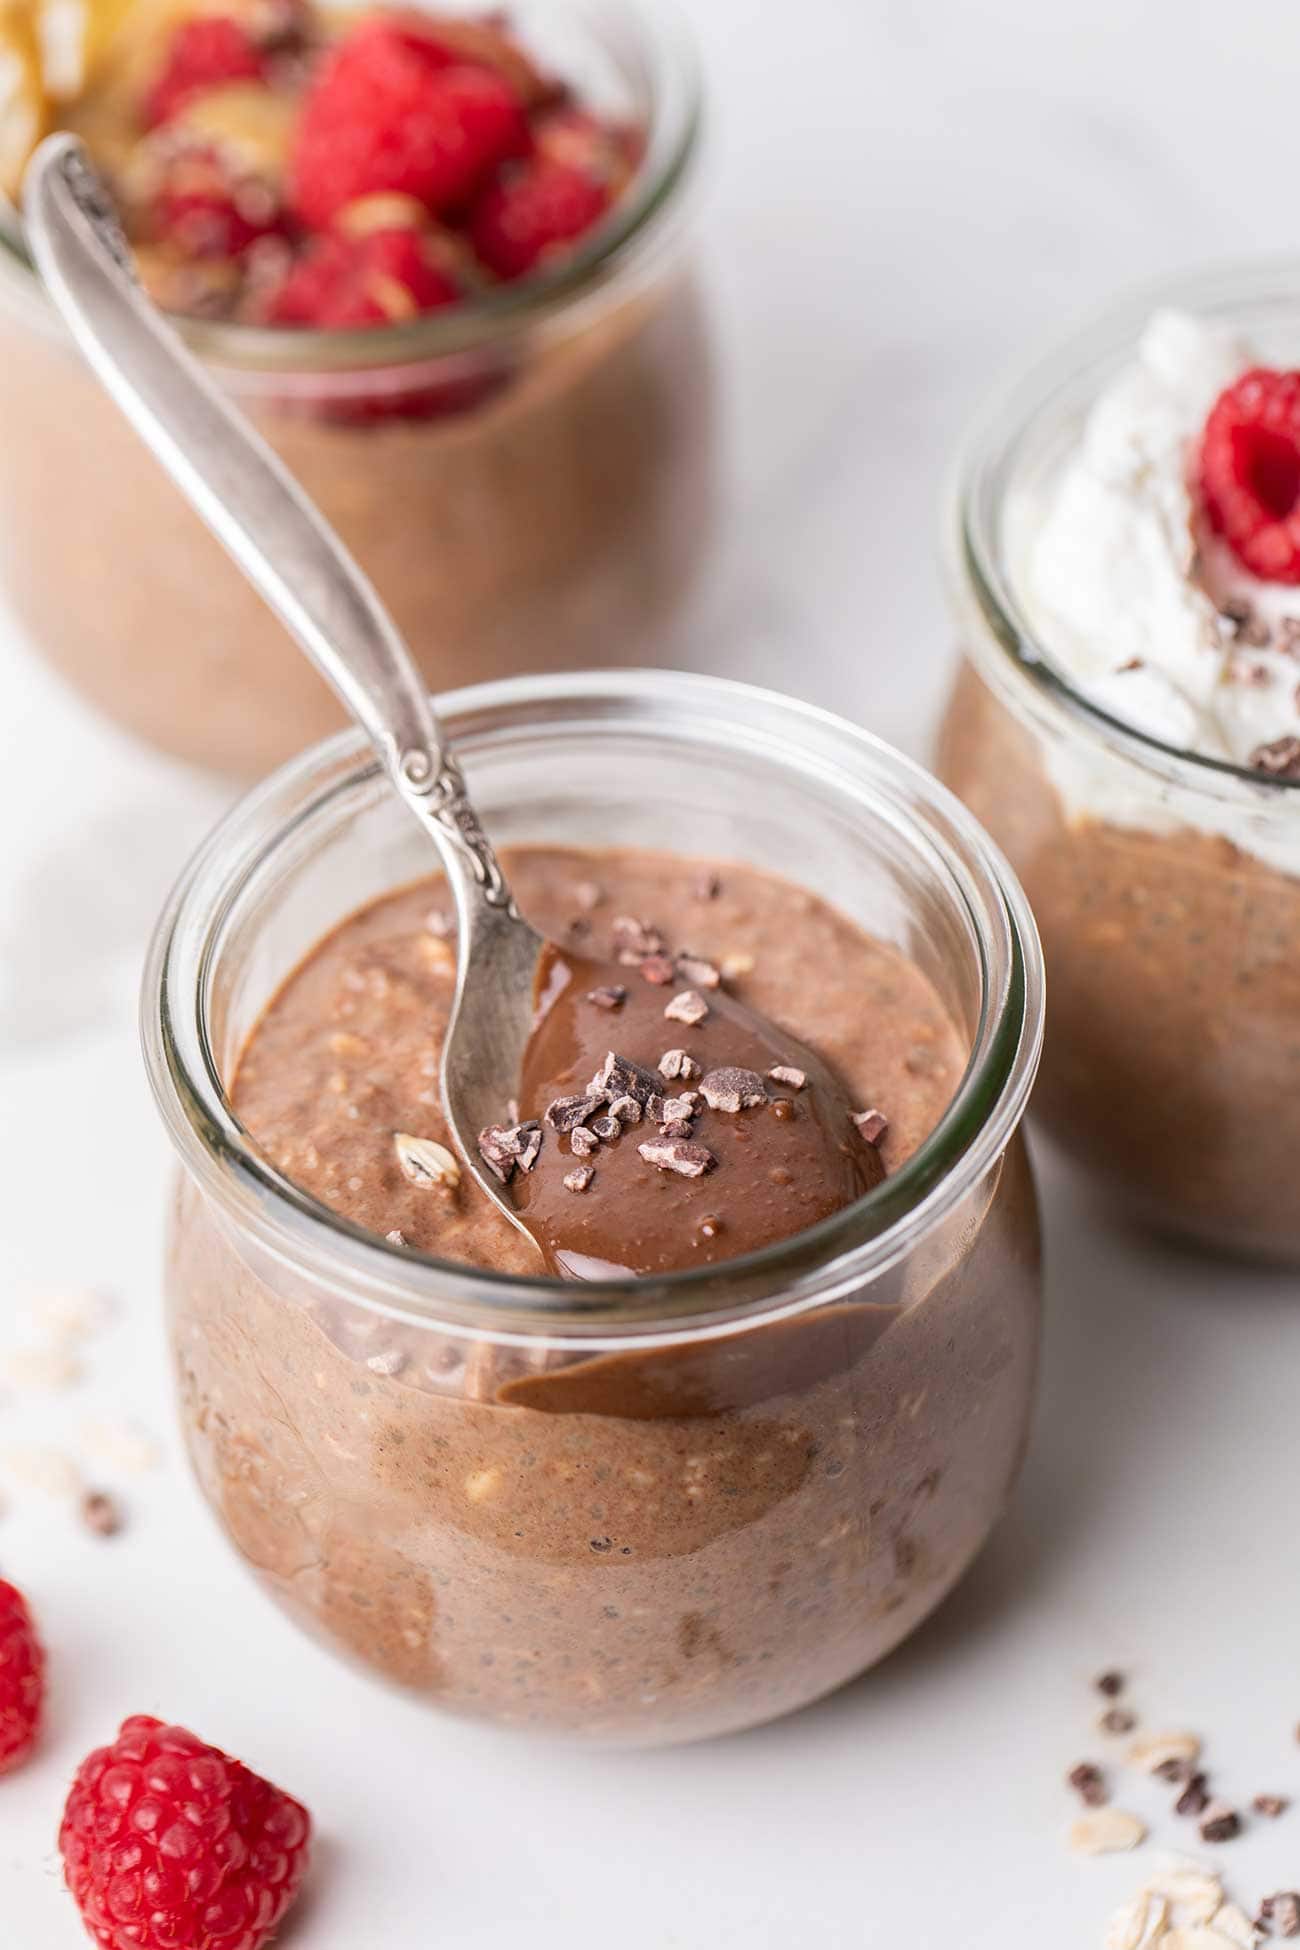 Jars of chocolate overnight oats shown with toppings.